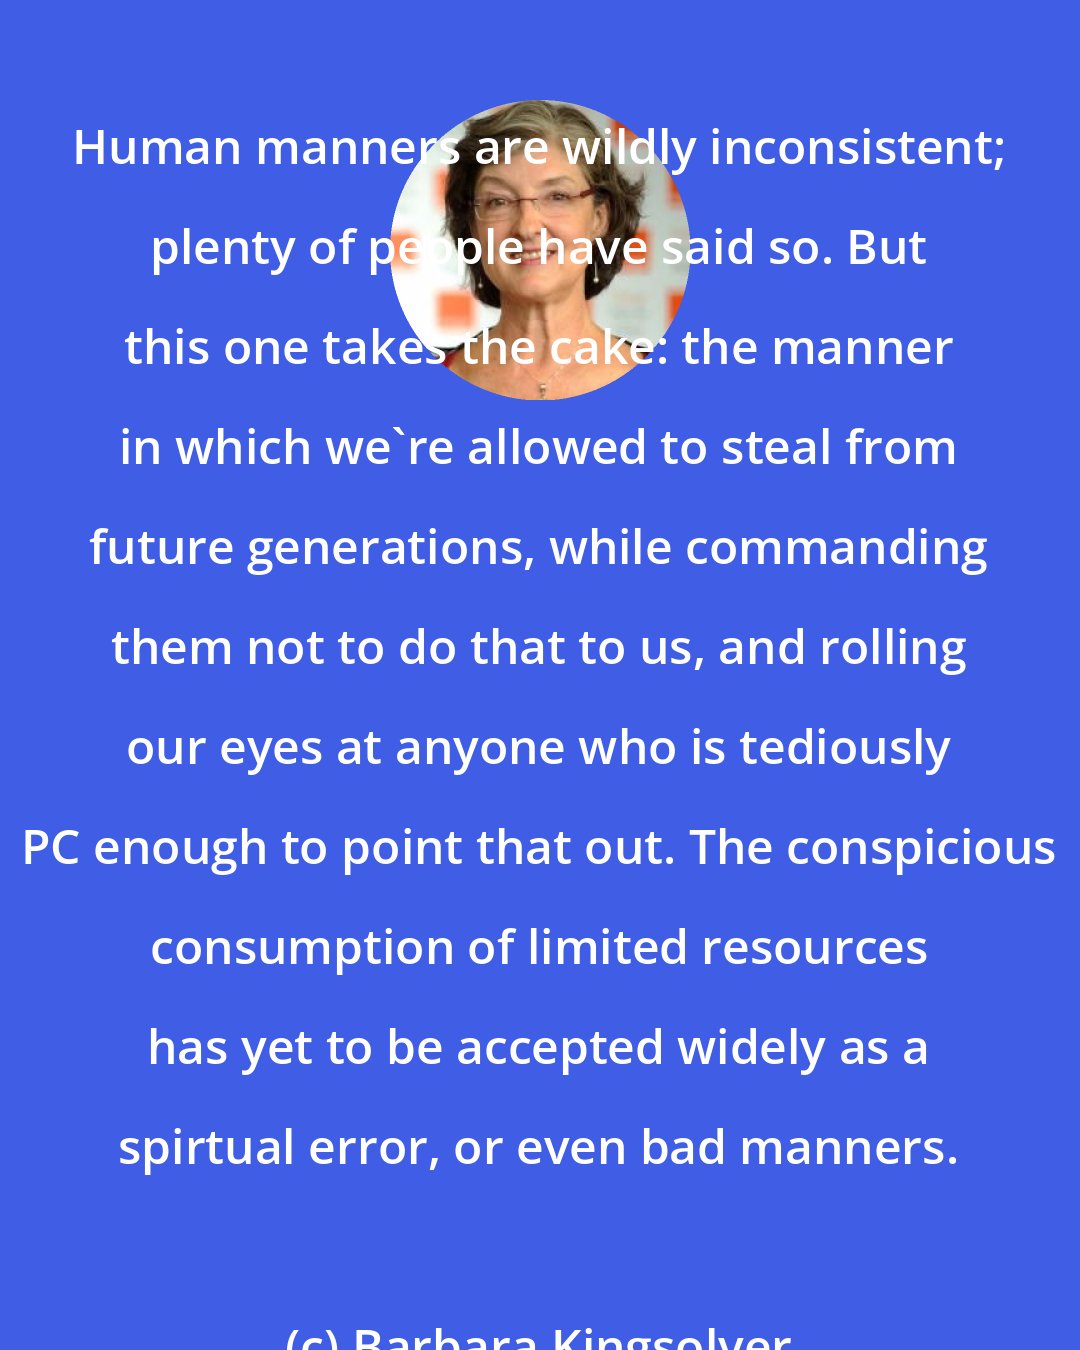 Barbara Kingsolver: Human manners are wildly inconsistent; plenty of people have said so. But this one takes the cake: the manner in which we're allowed to steal from future generations, while commanding them not to do that to us, and rolling our eyes at anyone who is tediously PC enough to point that out. The conspicious consumption of limited resources has yet to be accepted widely as a spirtual error, or even bad manners.